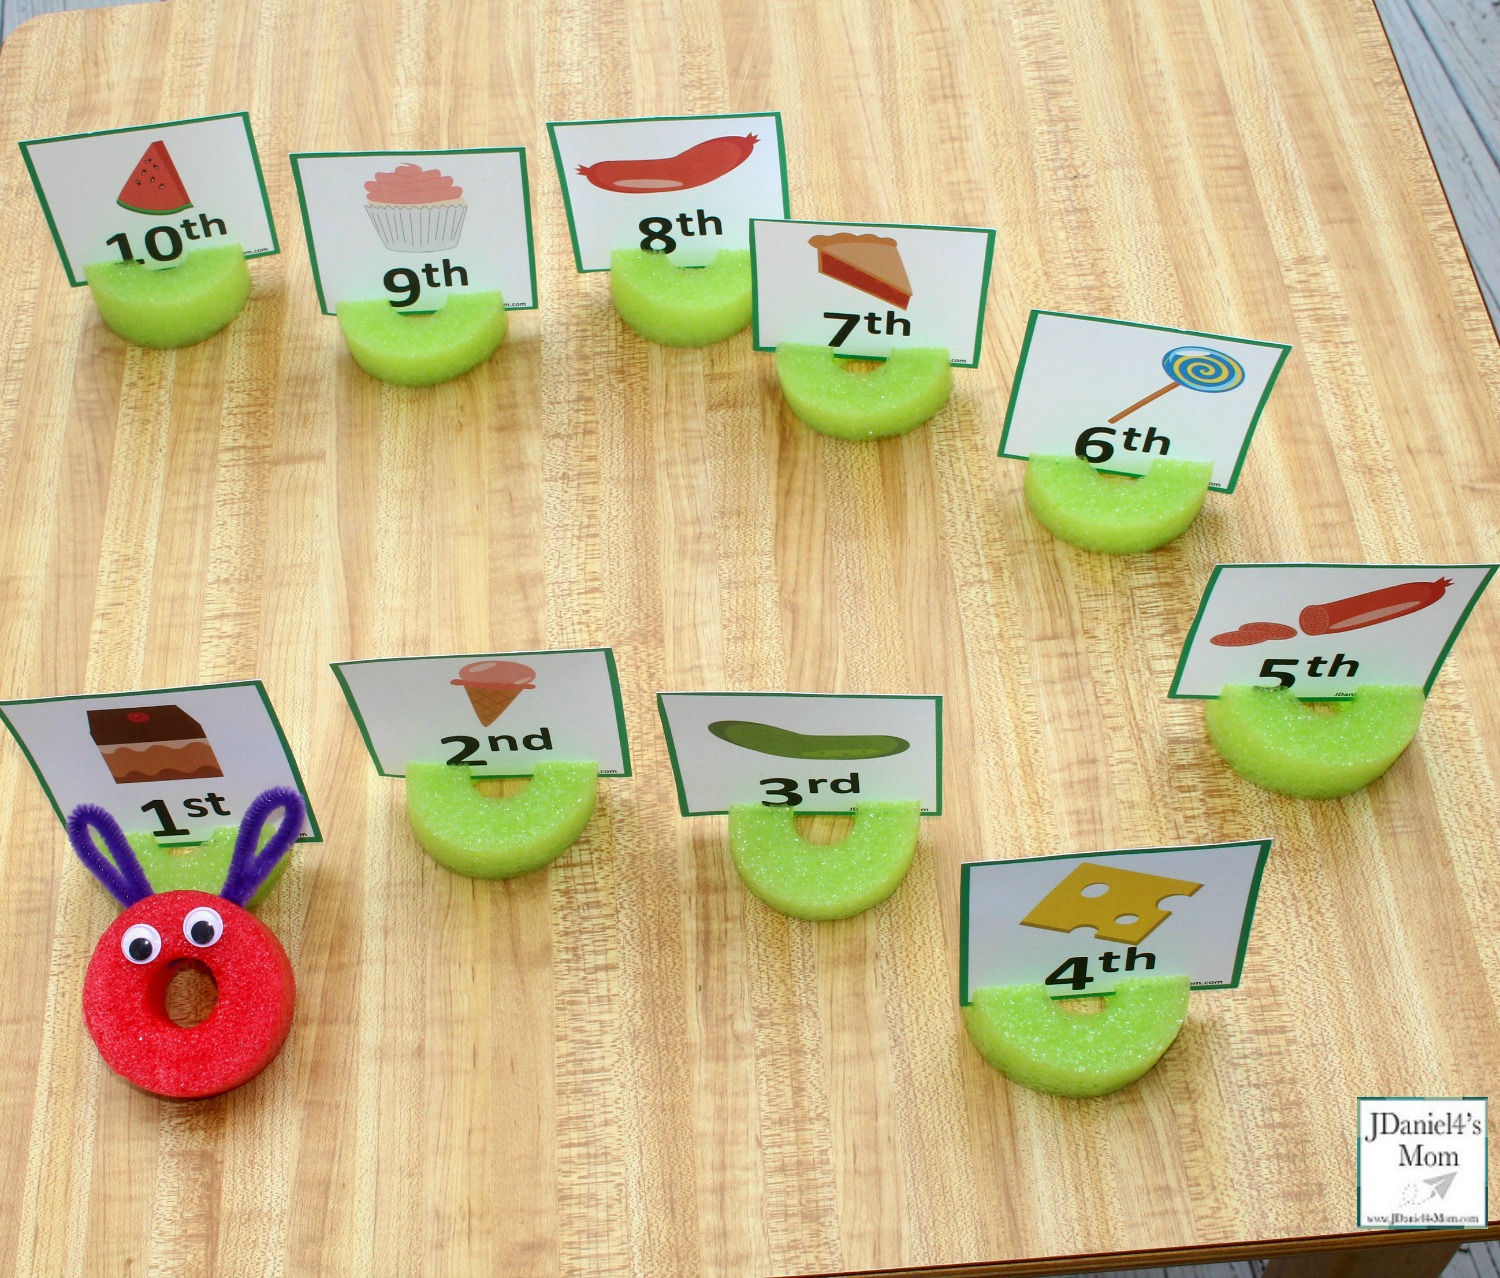 The Very Hungry Caterpillar Number Sequencing Activities with Printables -Counting 1st to 10th